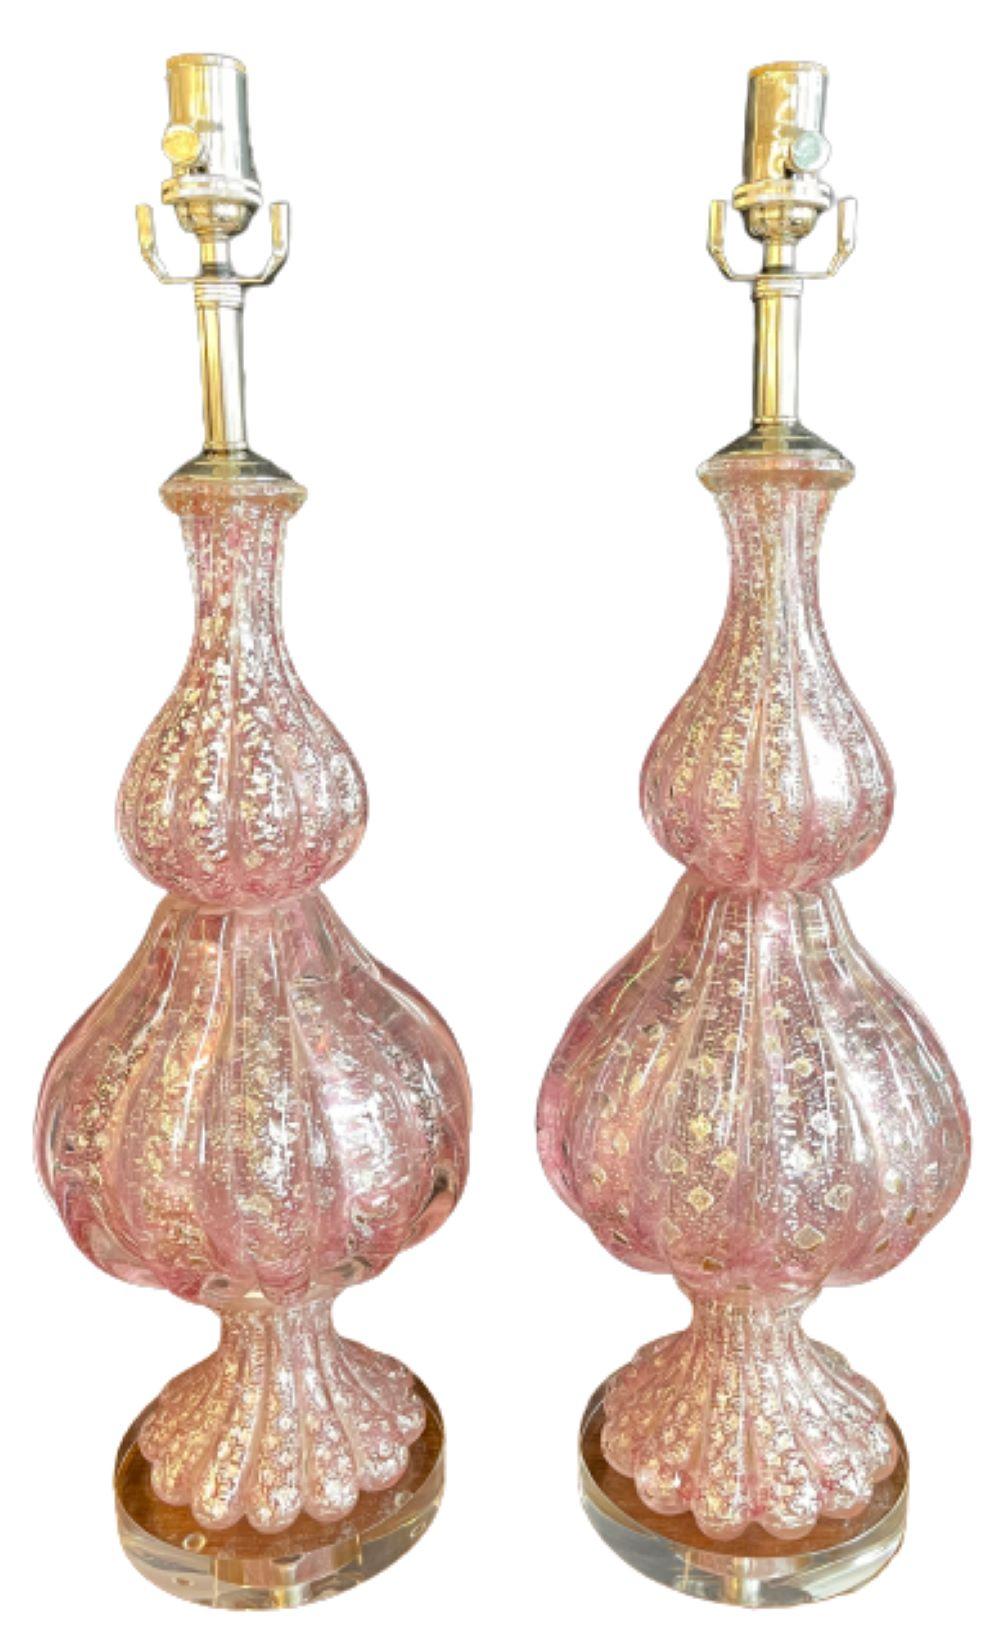 Art Deco Pair of Barovier & Toso Murano Glass Lamps Lucite Base